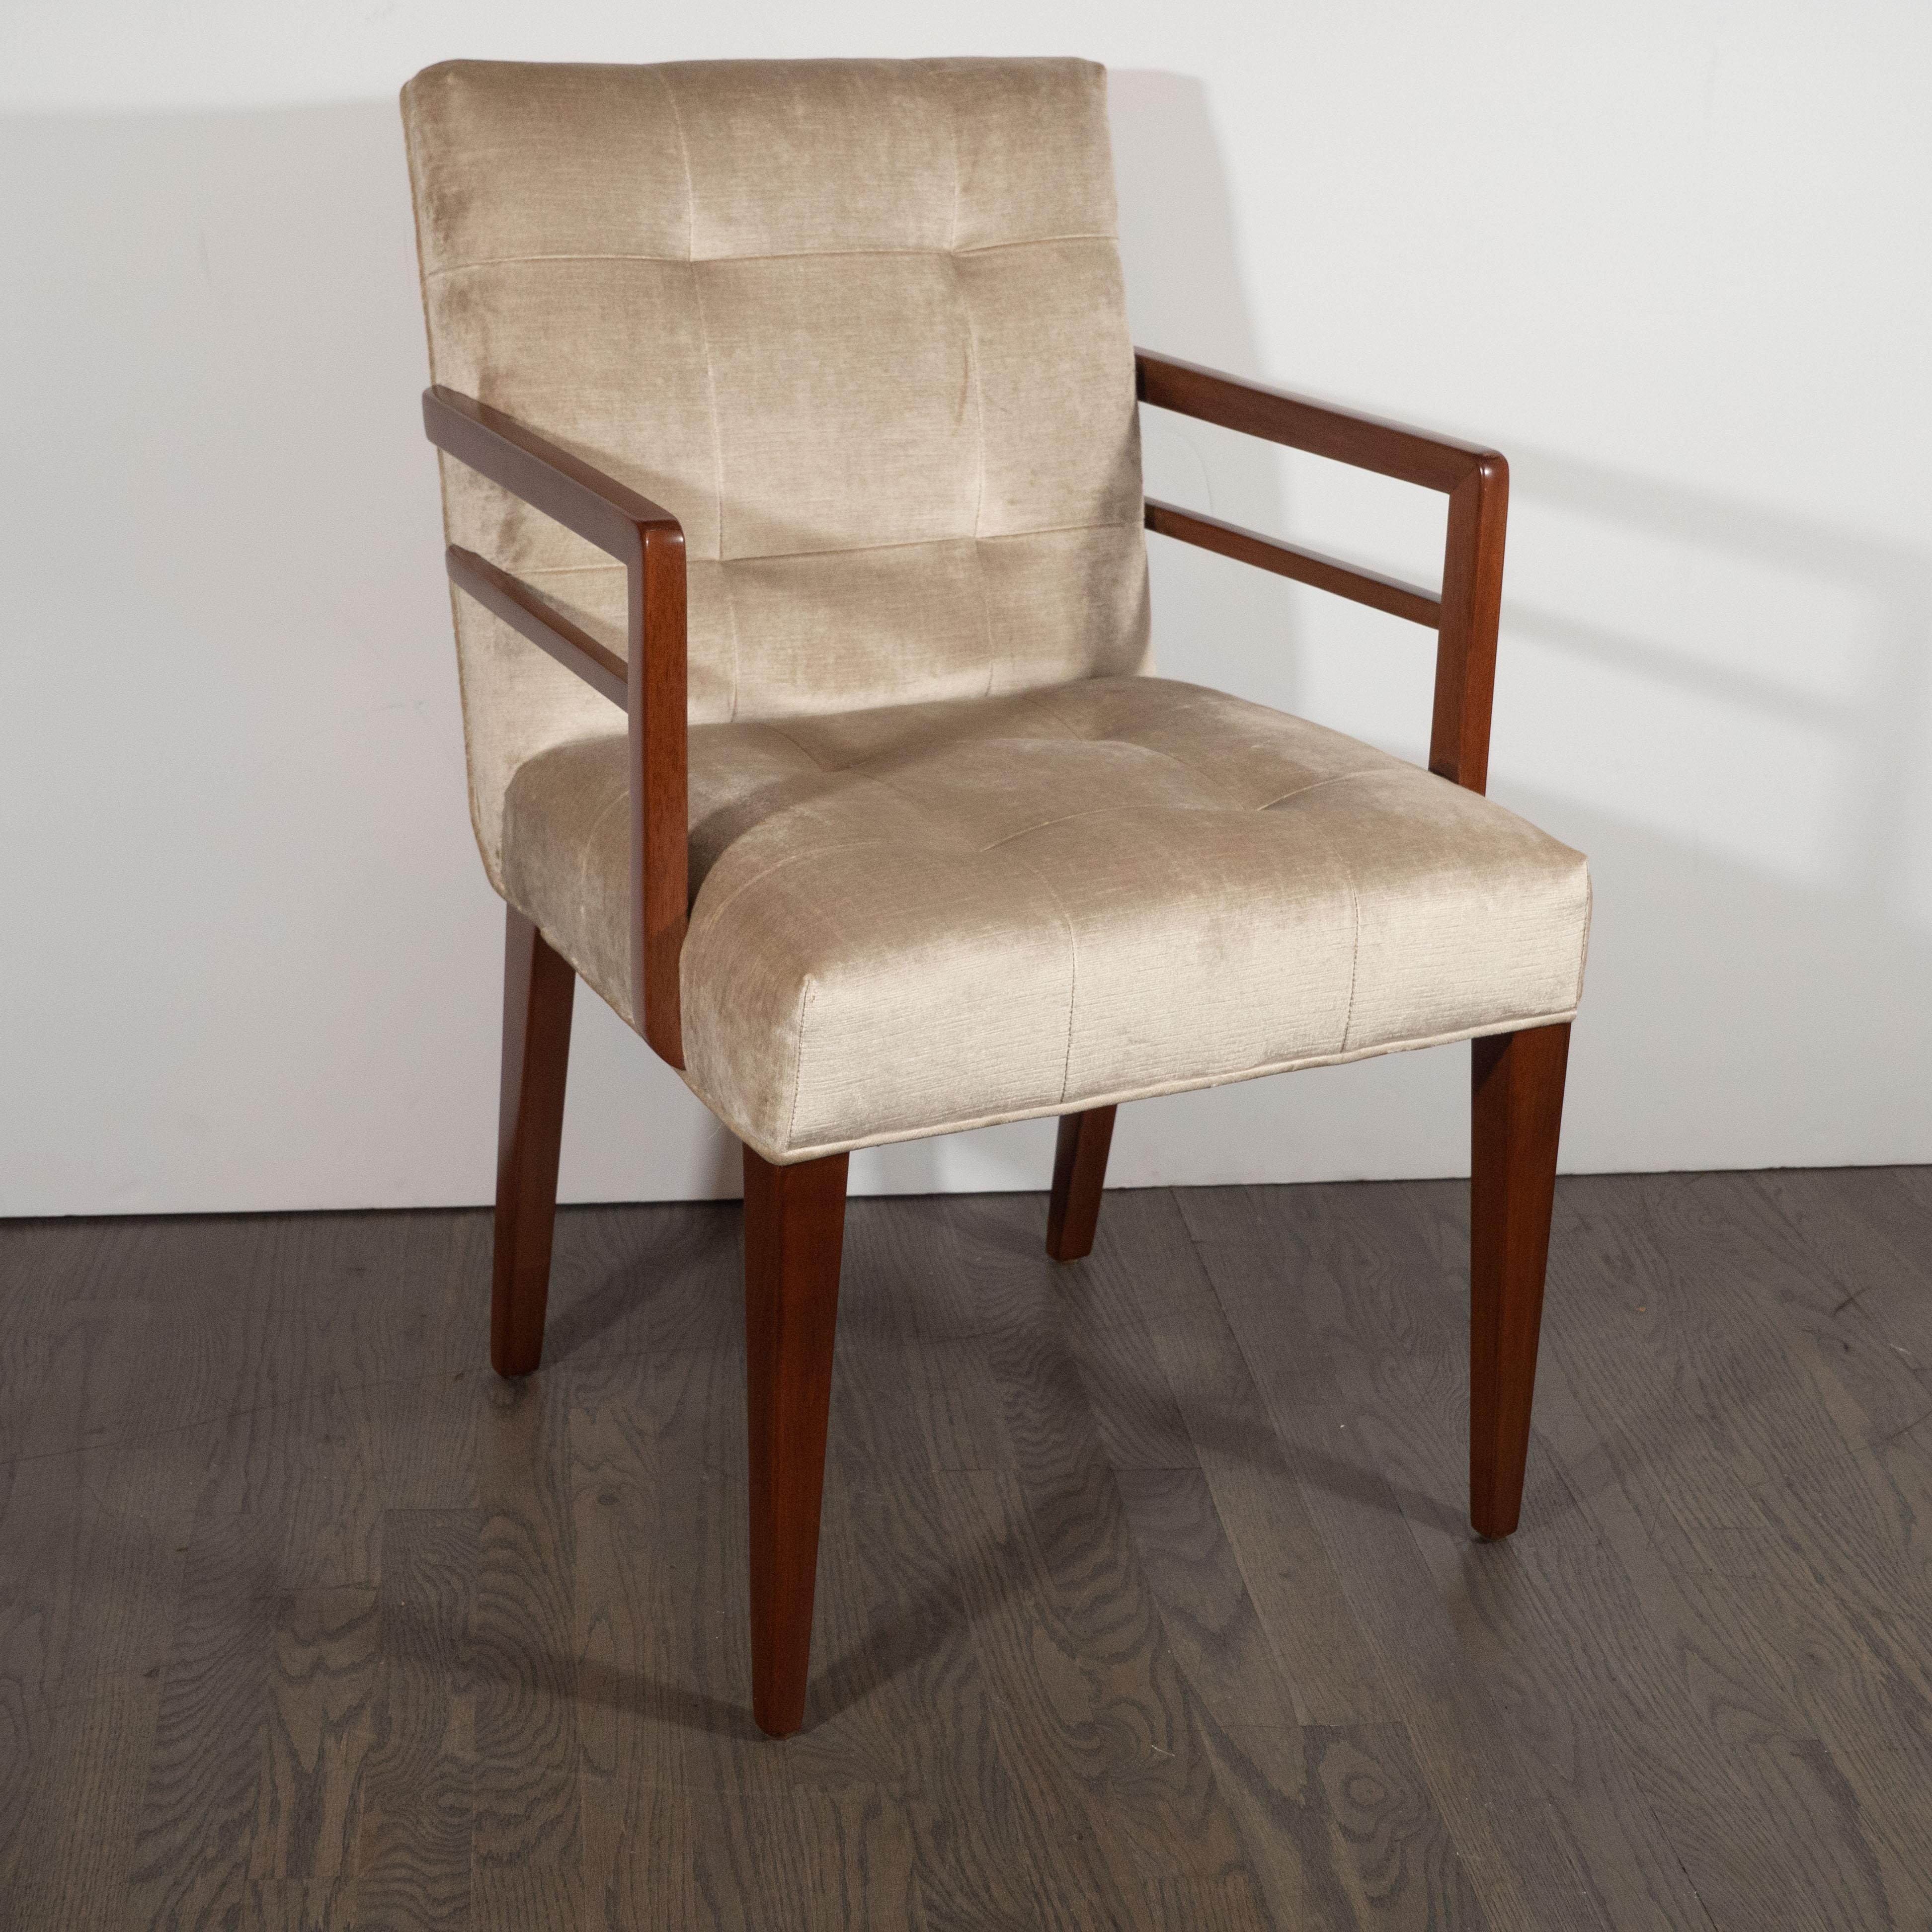 American Set of Eight Art Deco Dining Chairs in Walnut & Champagne Velvet, Gilbert Rohde